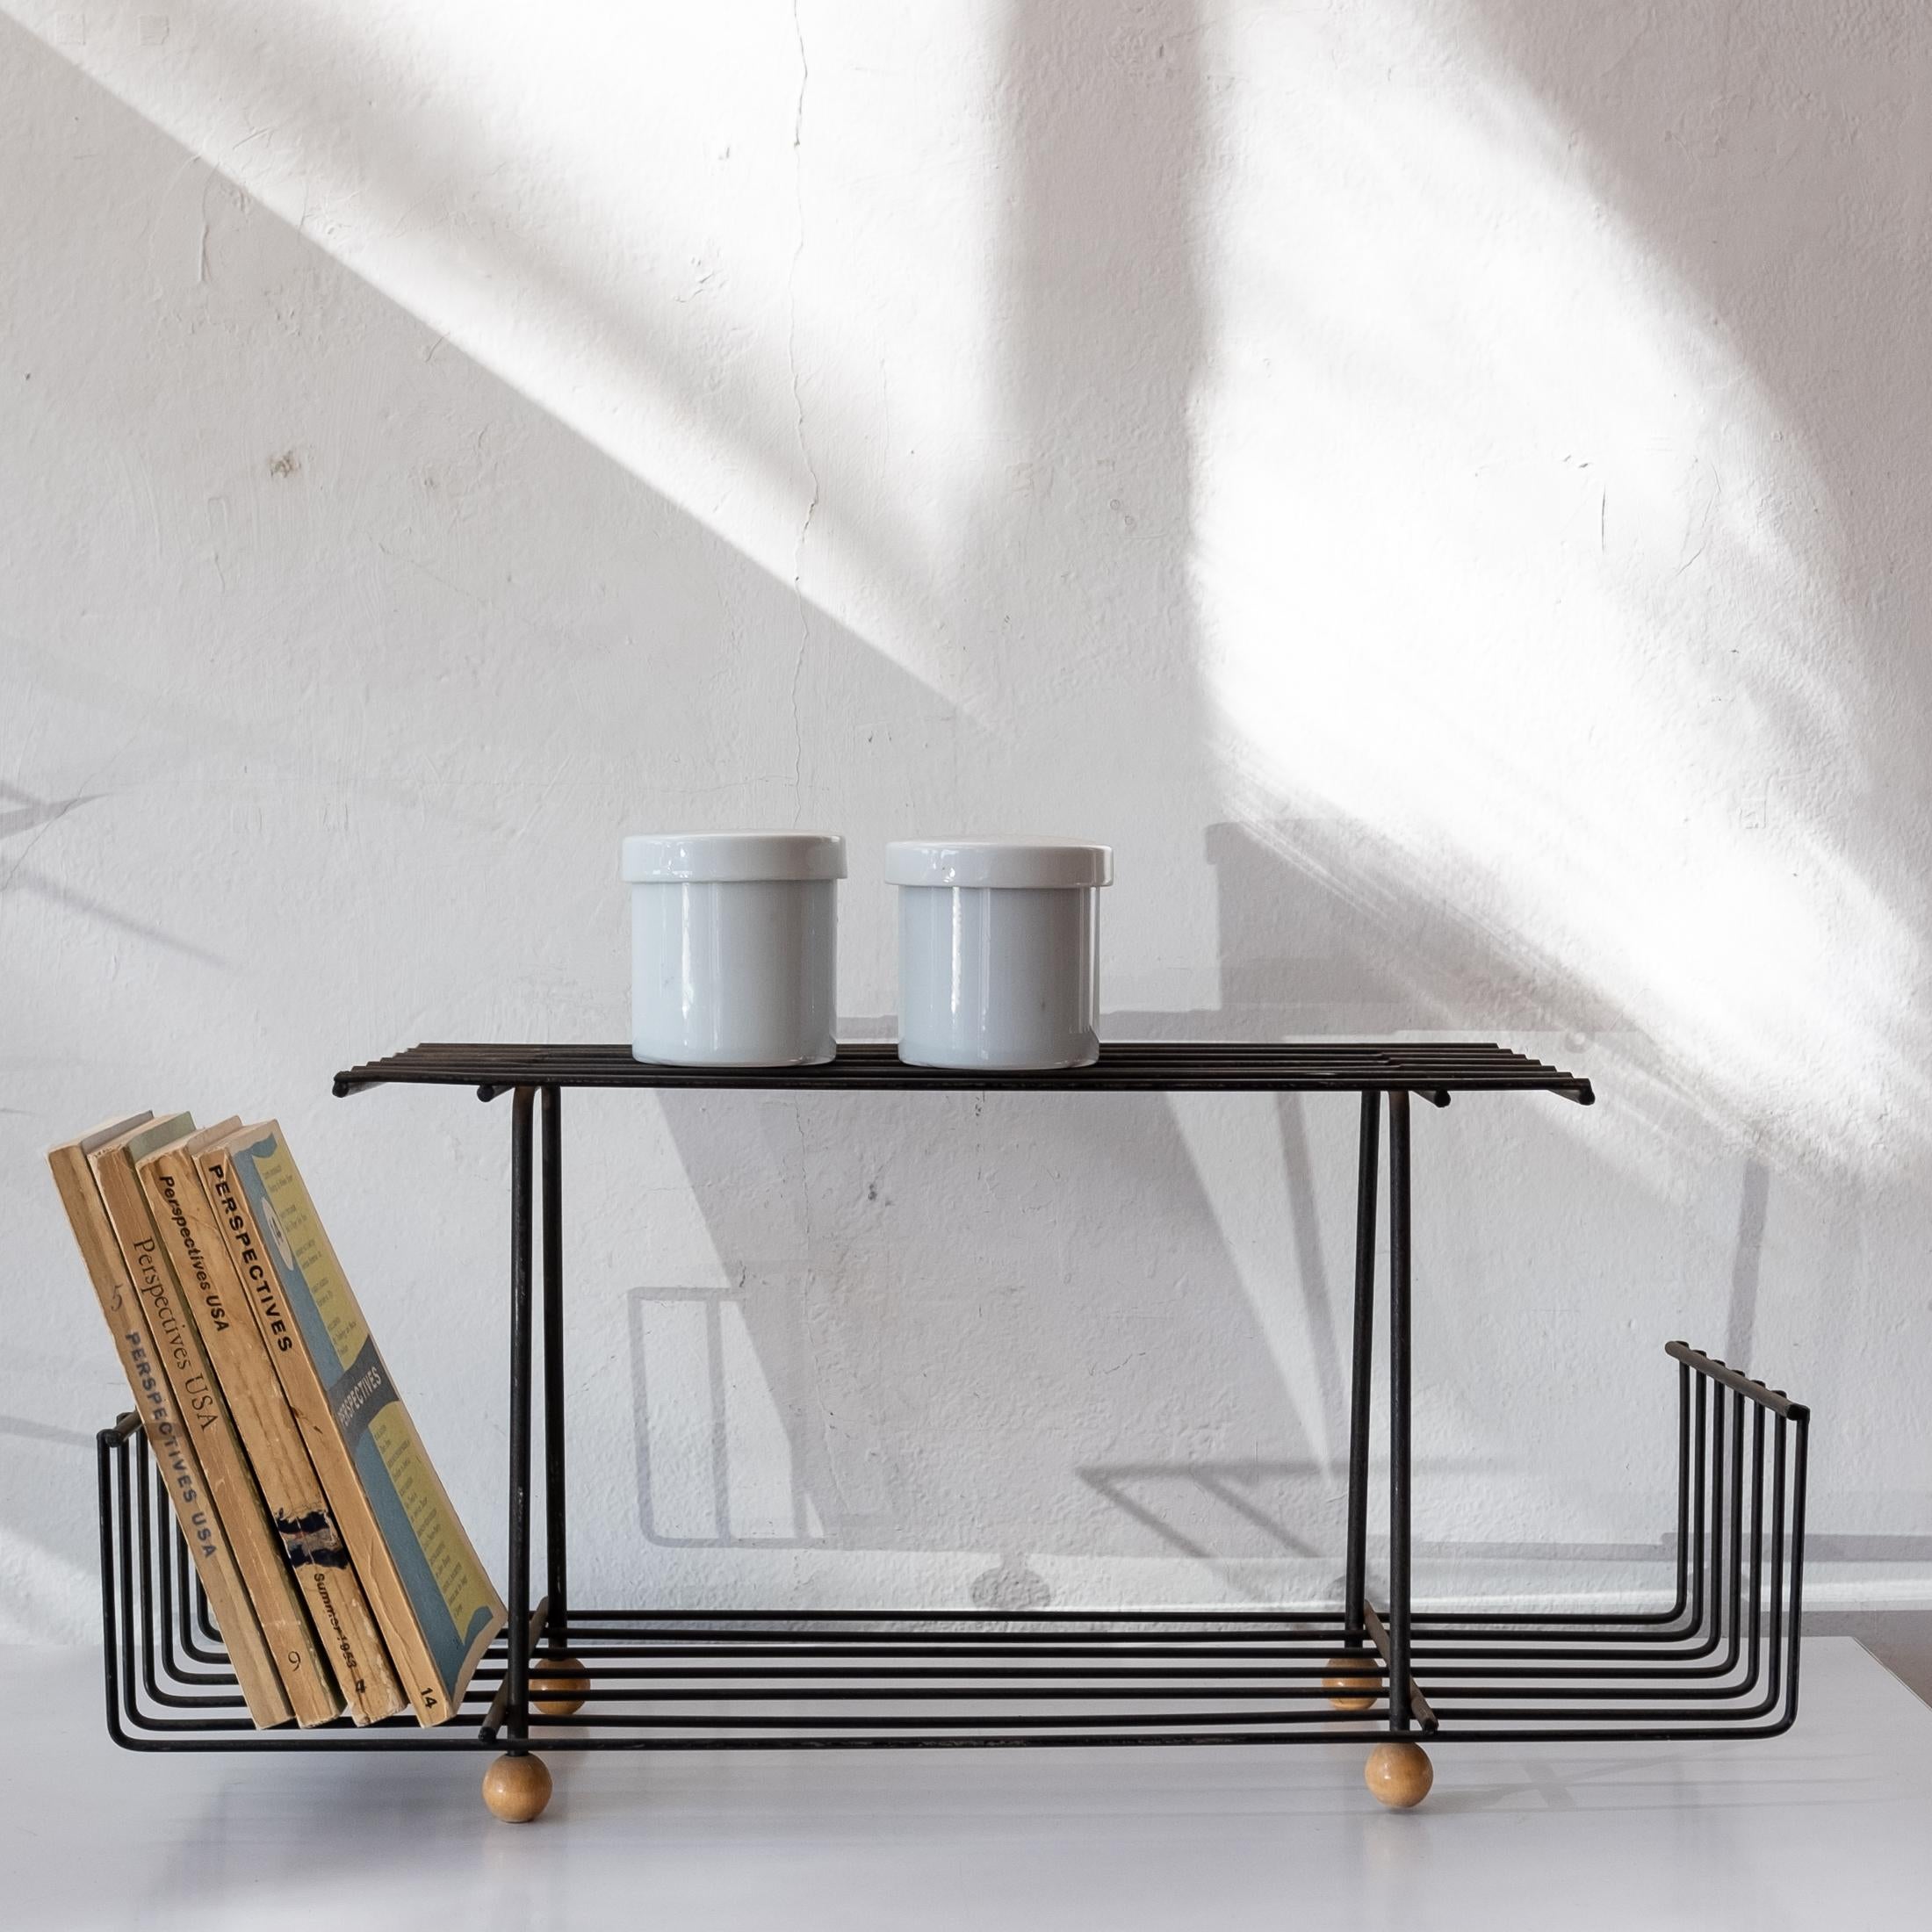 Tabletop or wall-mounted shelf by industrial designer Tony Paul. Iron structure will solid wood ball feet. Great for on a cabinet or mounted on a wall. 

Tony Paul studied at Brooklyn Polytechnic and majored in design at Pratt Institute. Before